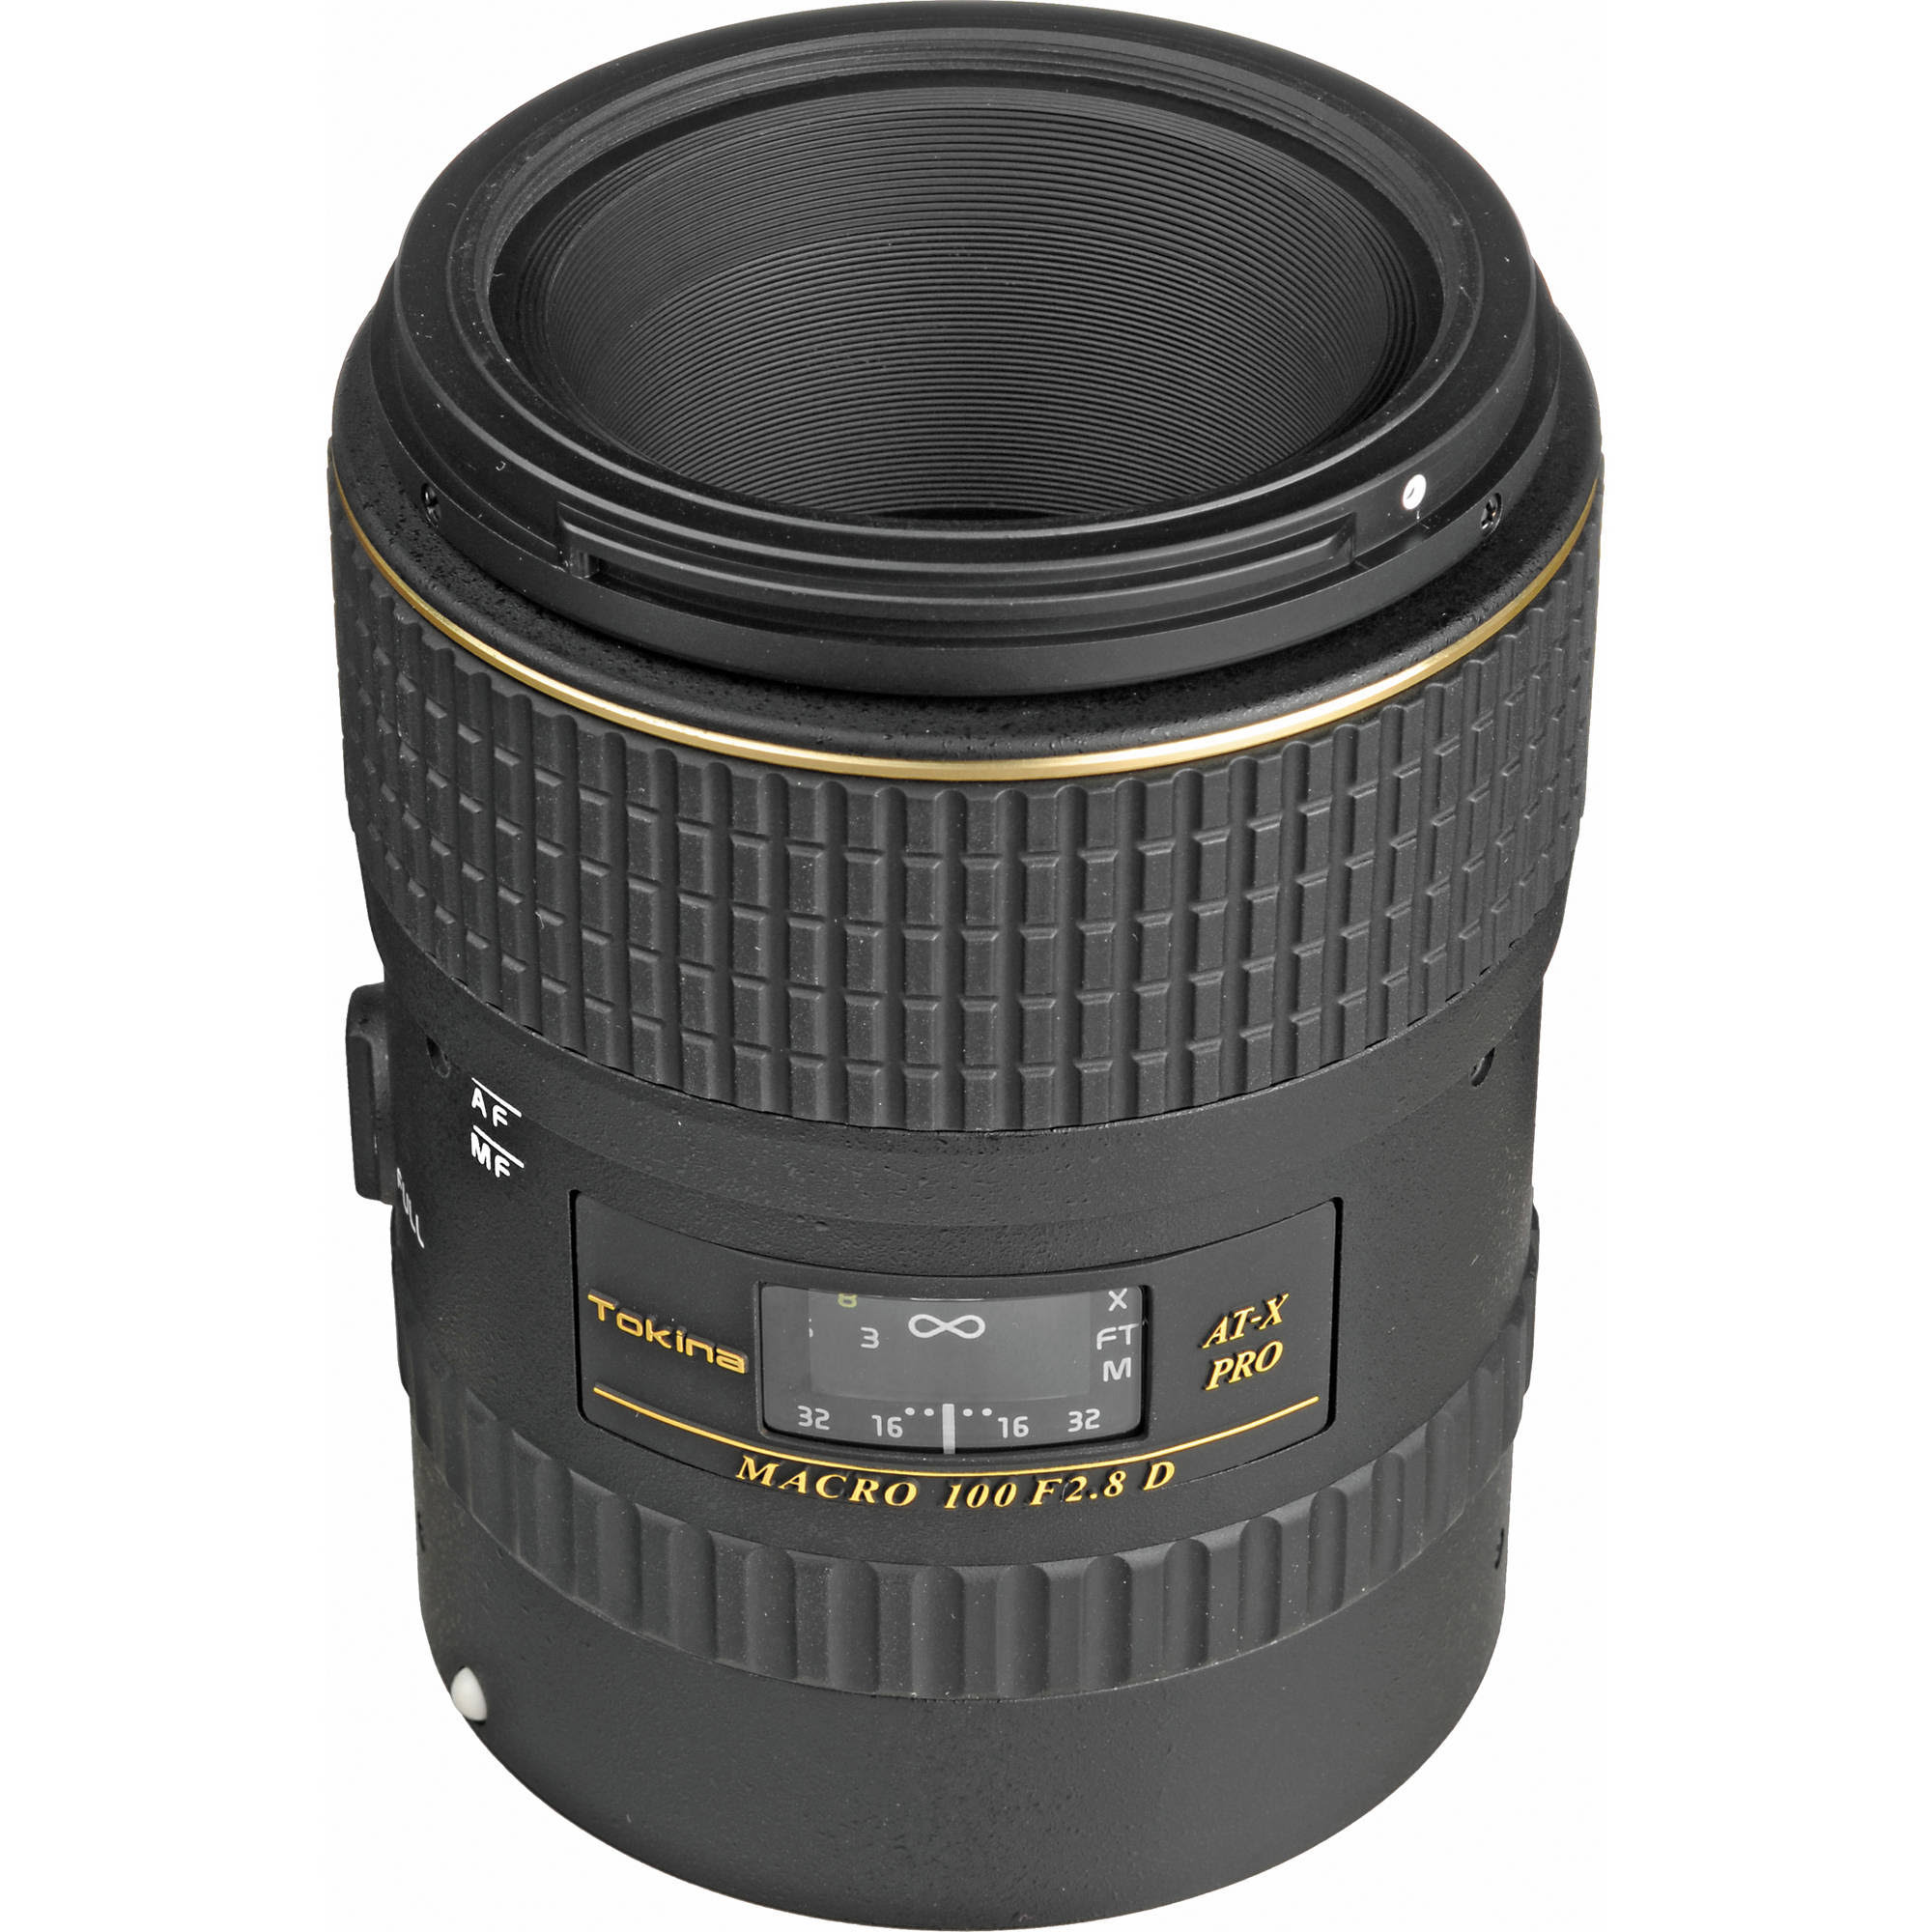 THK Photo Products, Inc. Tokina AT-X AF M100 PRO D For Nikon